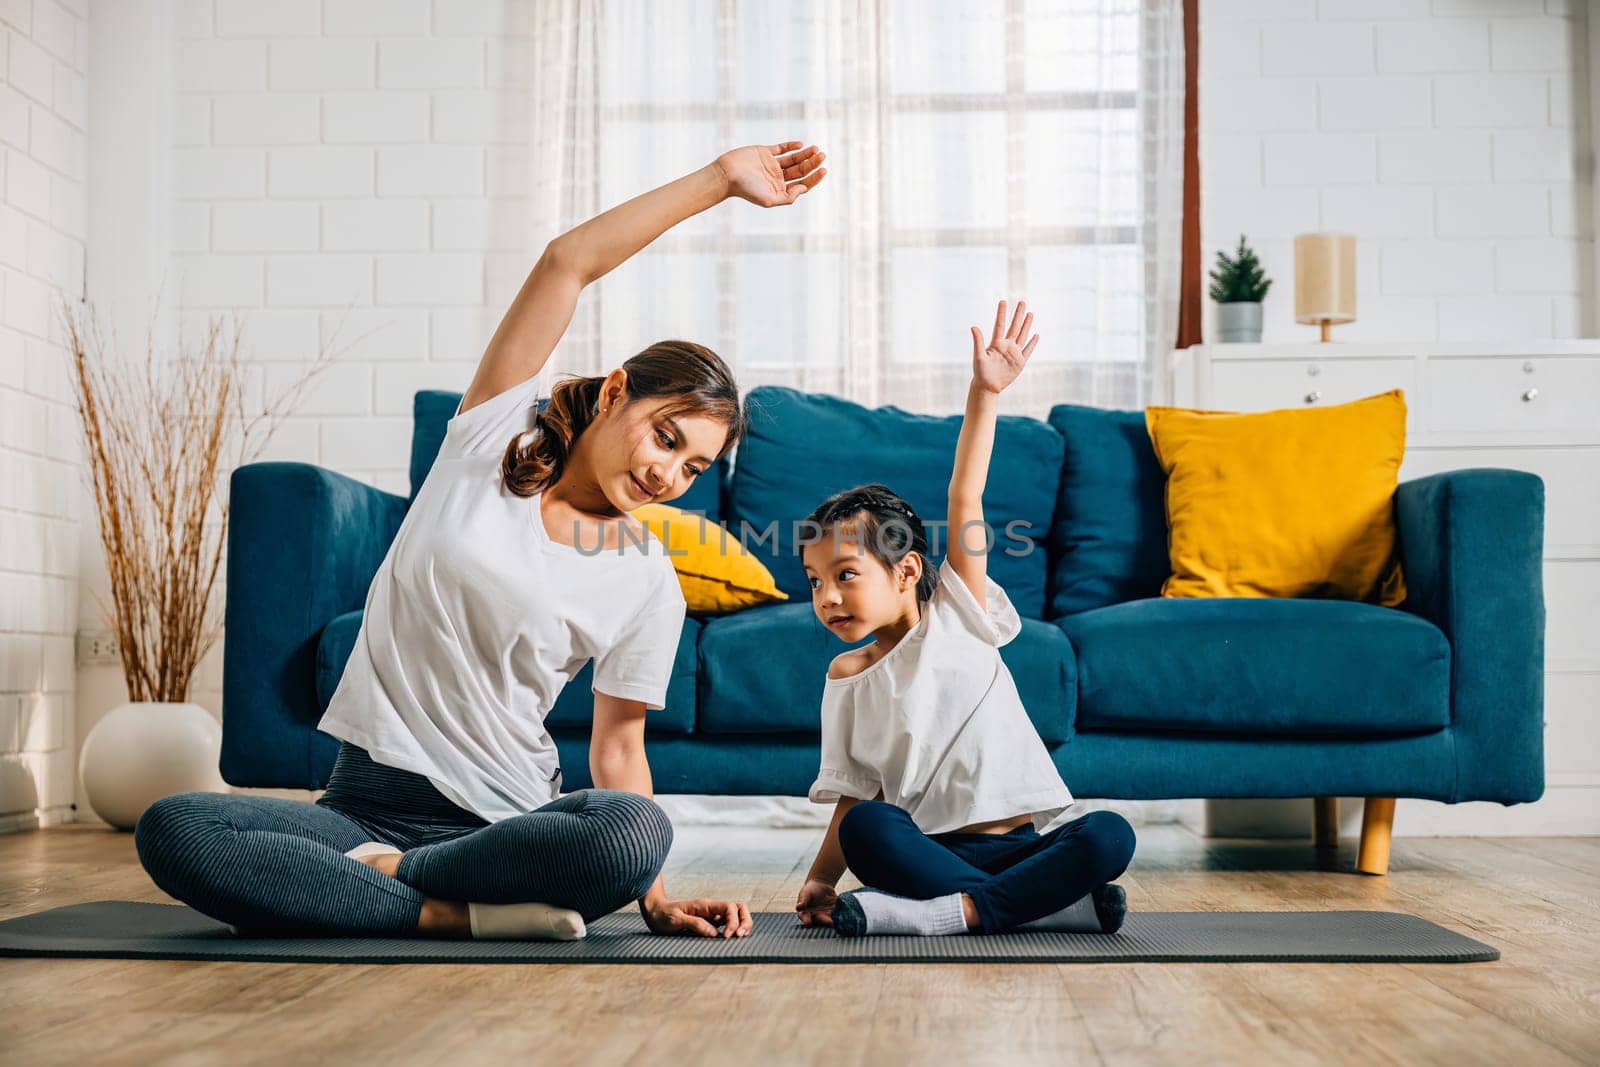 A mother supports her little daughter's yoga practice creating a happy family moment of relaxation bonding and education. Their smiles and concentration highlight domestic togetherness and wellness.